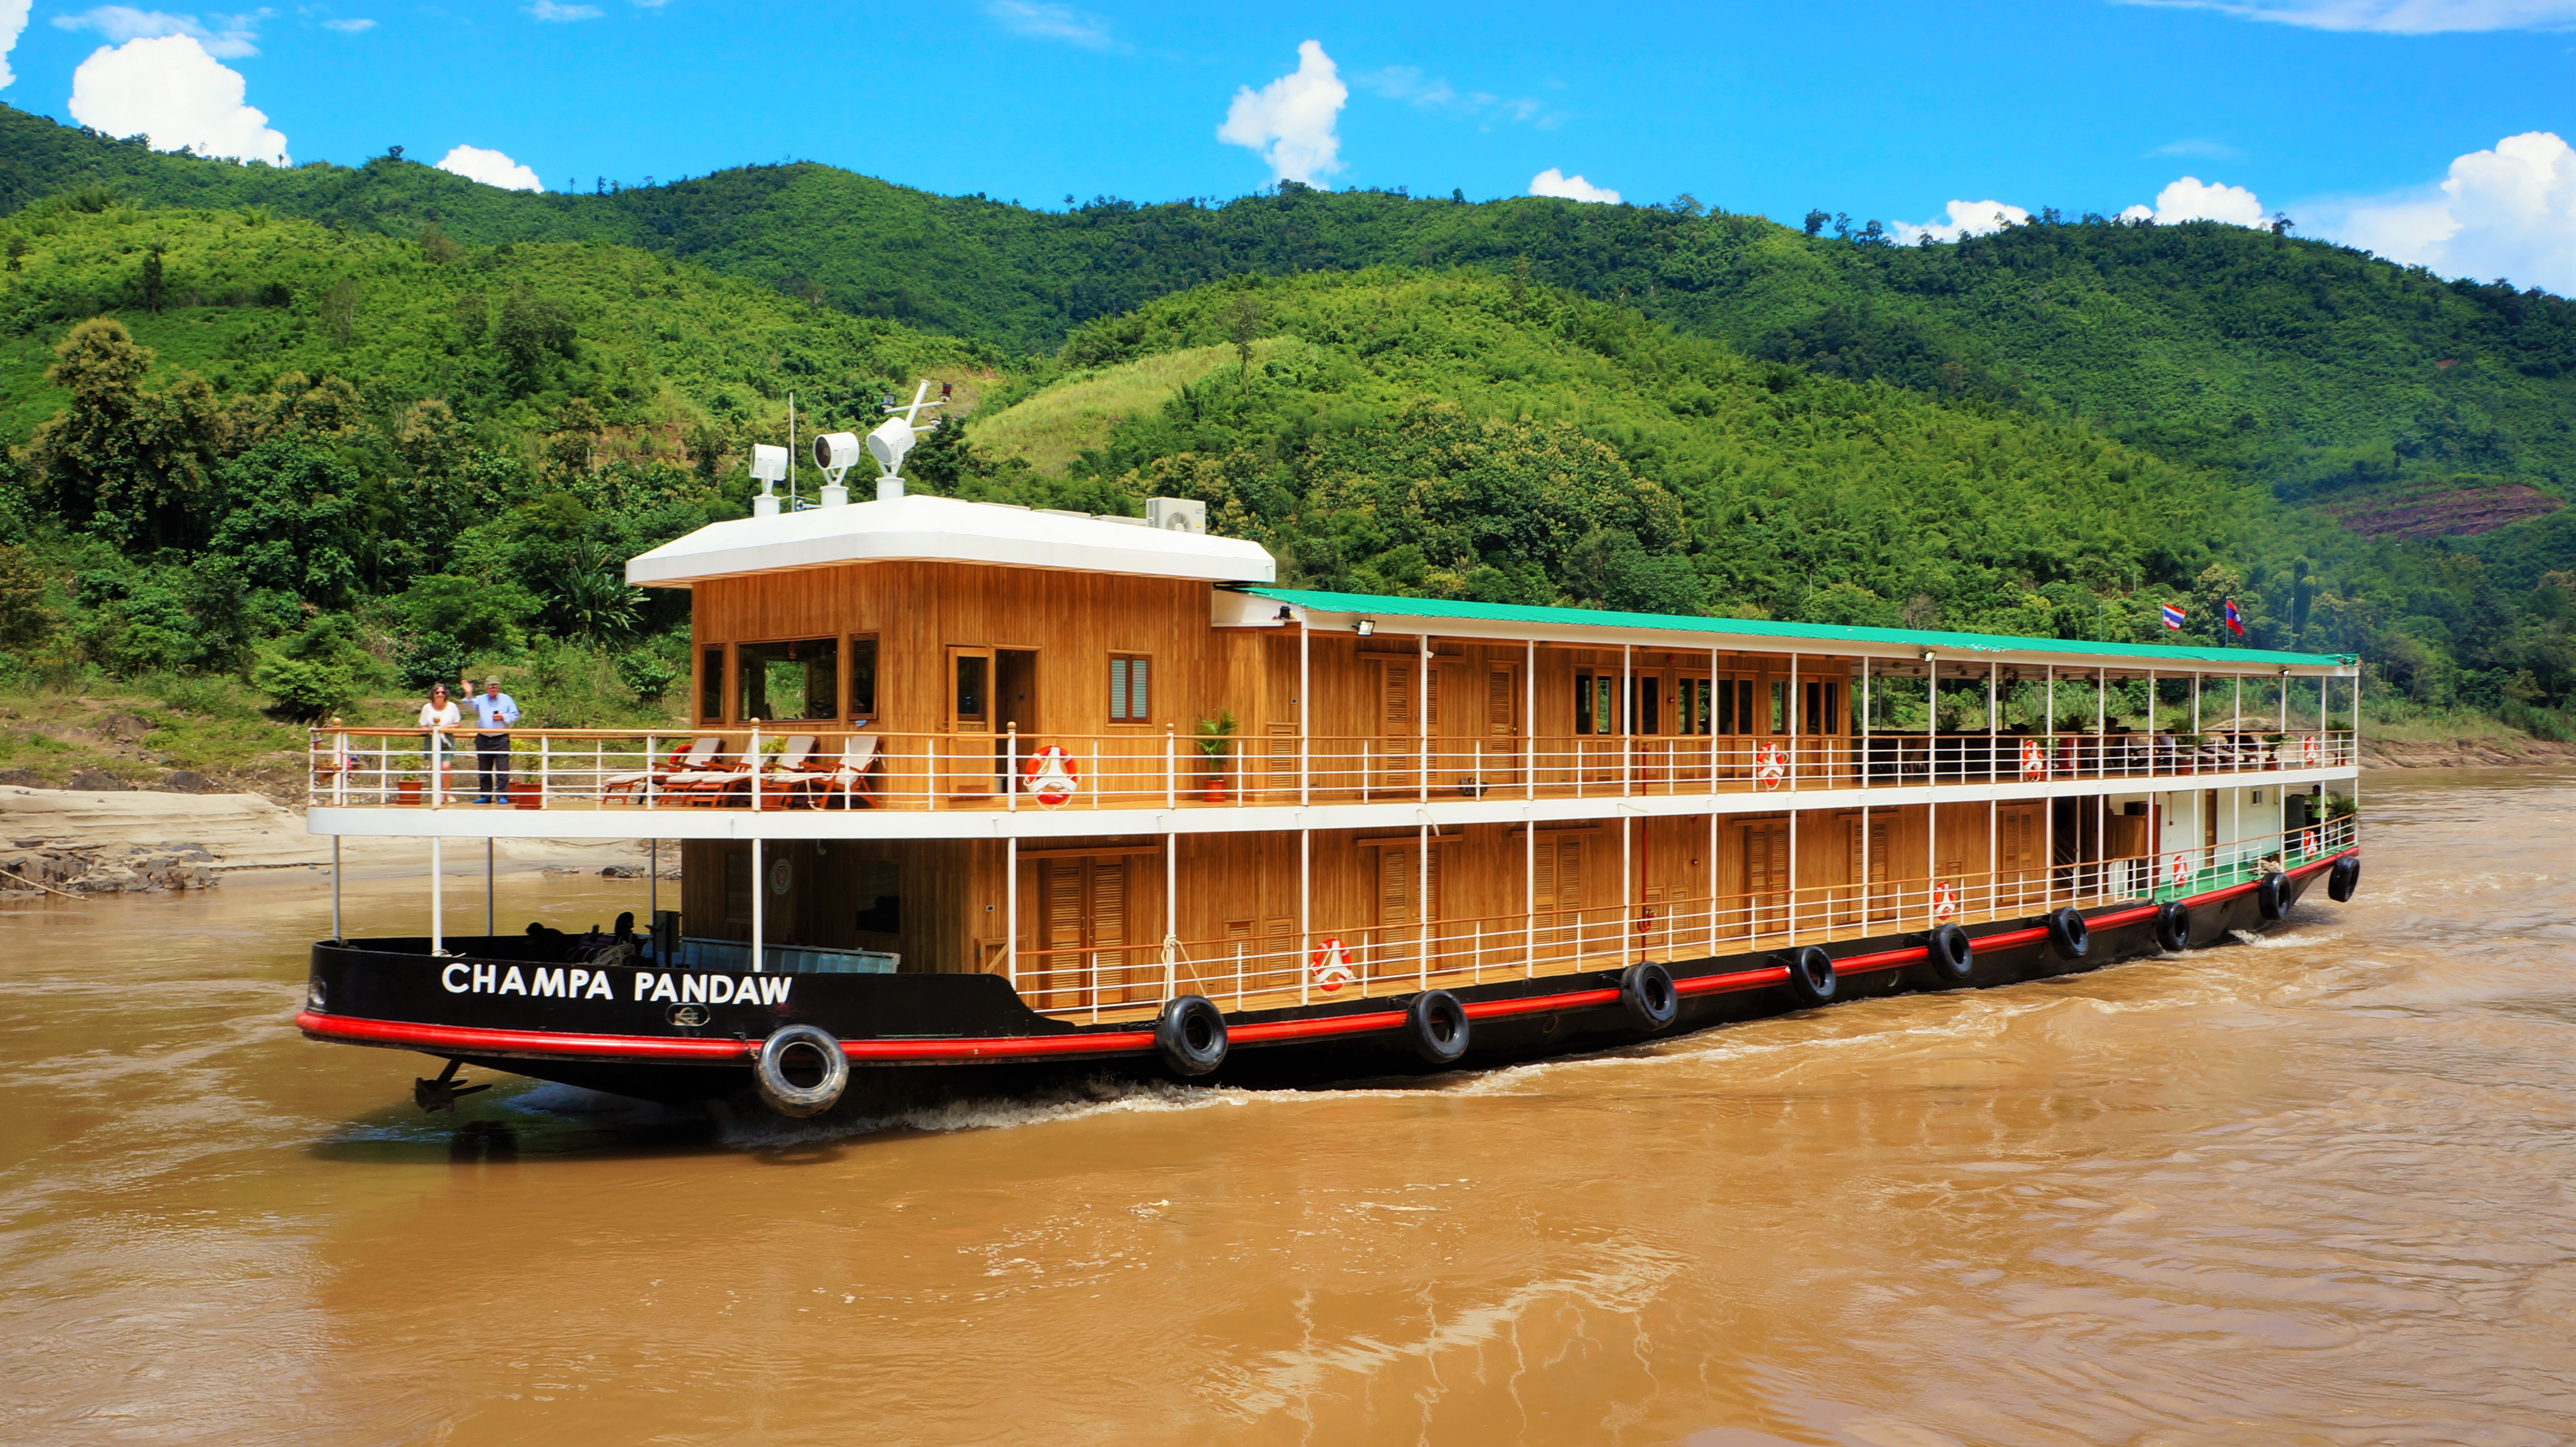 Pandaw River Expeditions, RV Champa Pandaw